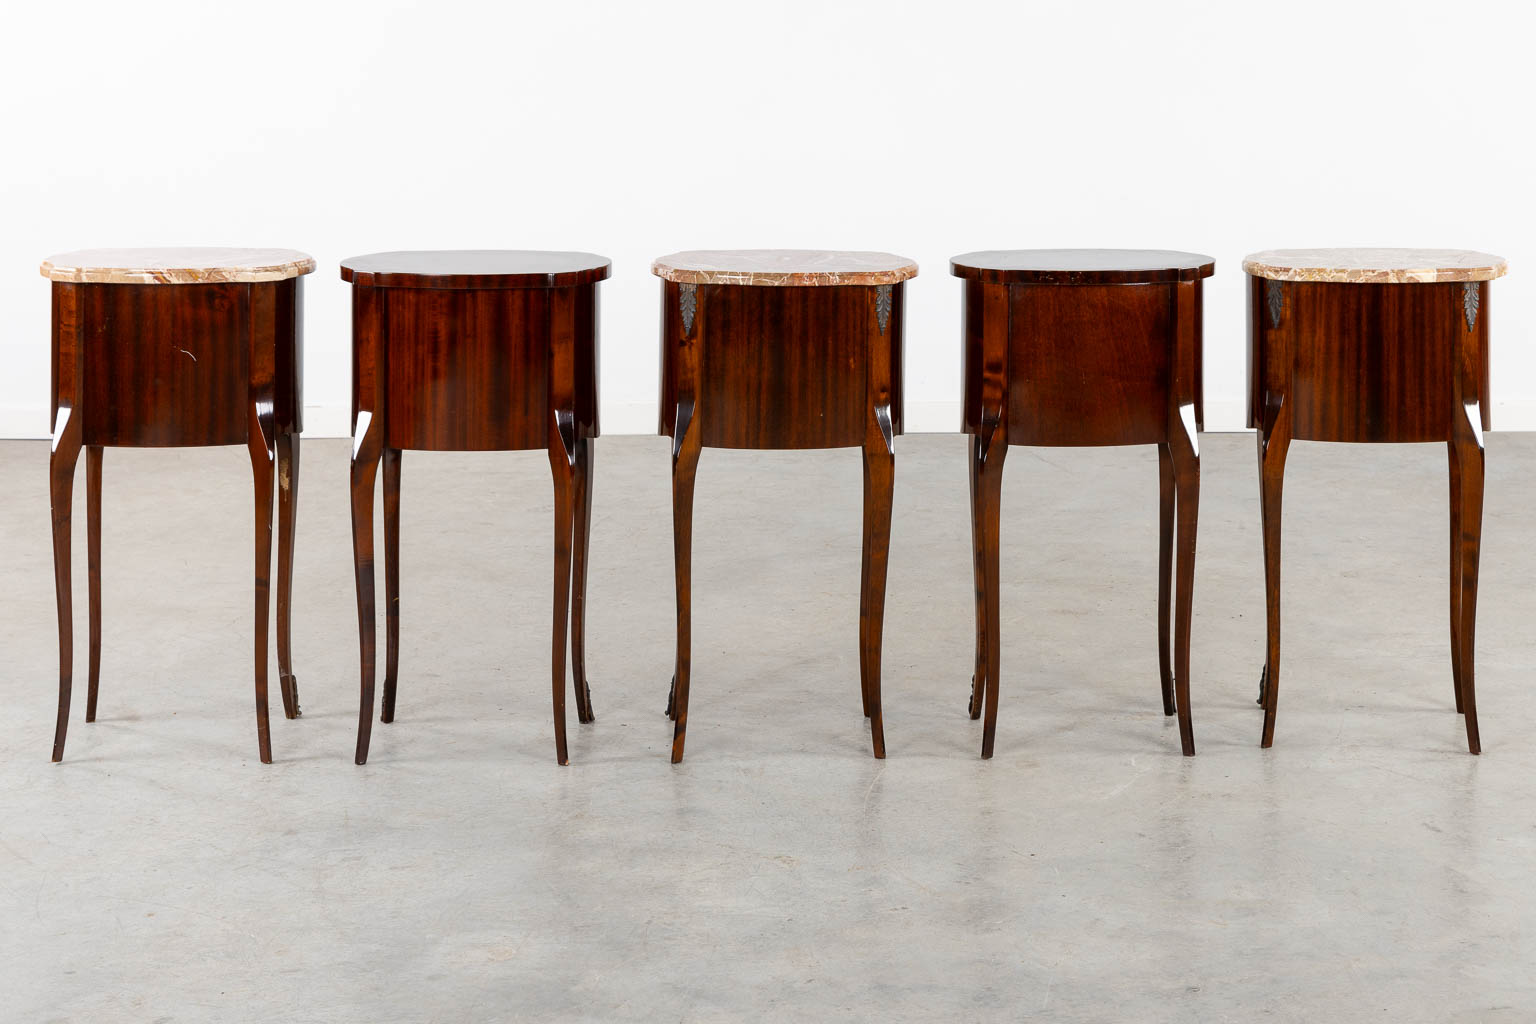 Five side tables or nightstands. (L:27 x W:40 x H:72 cm)